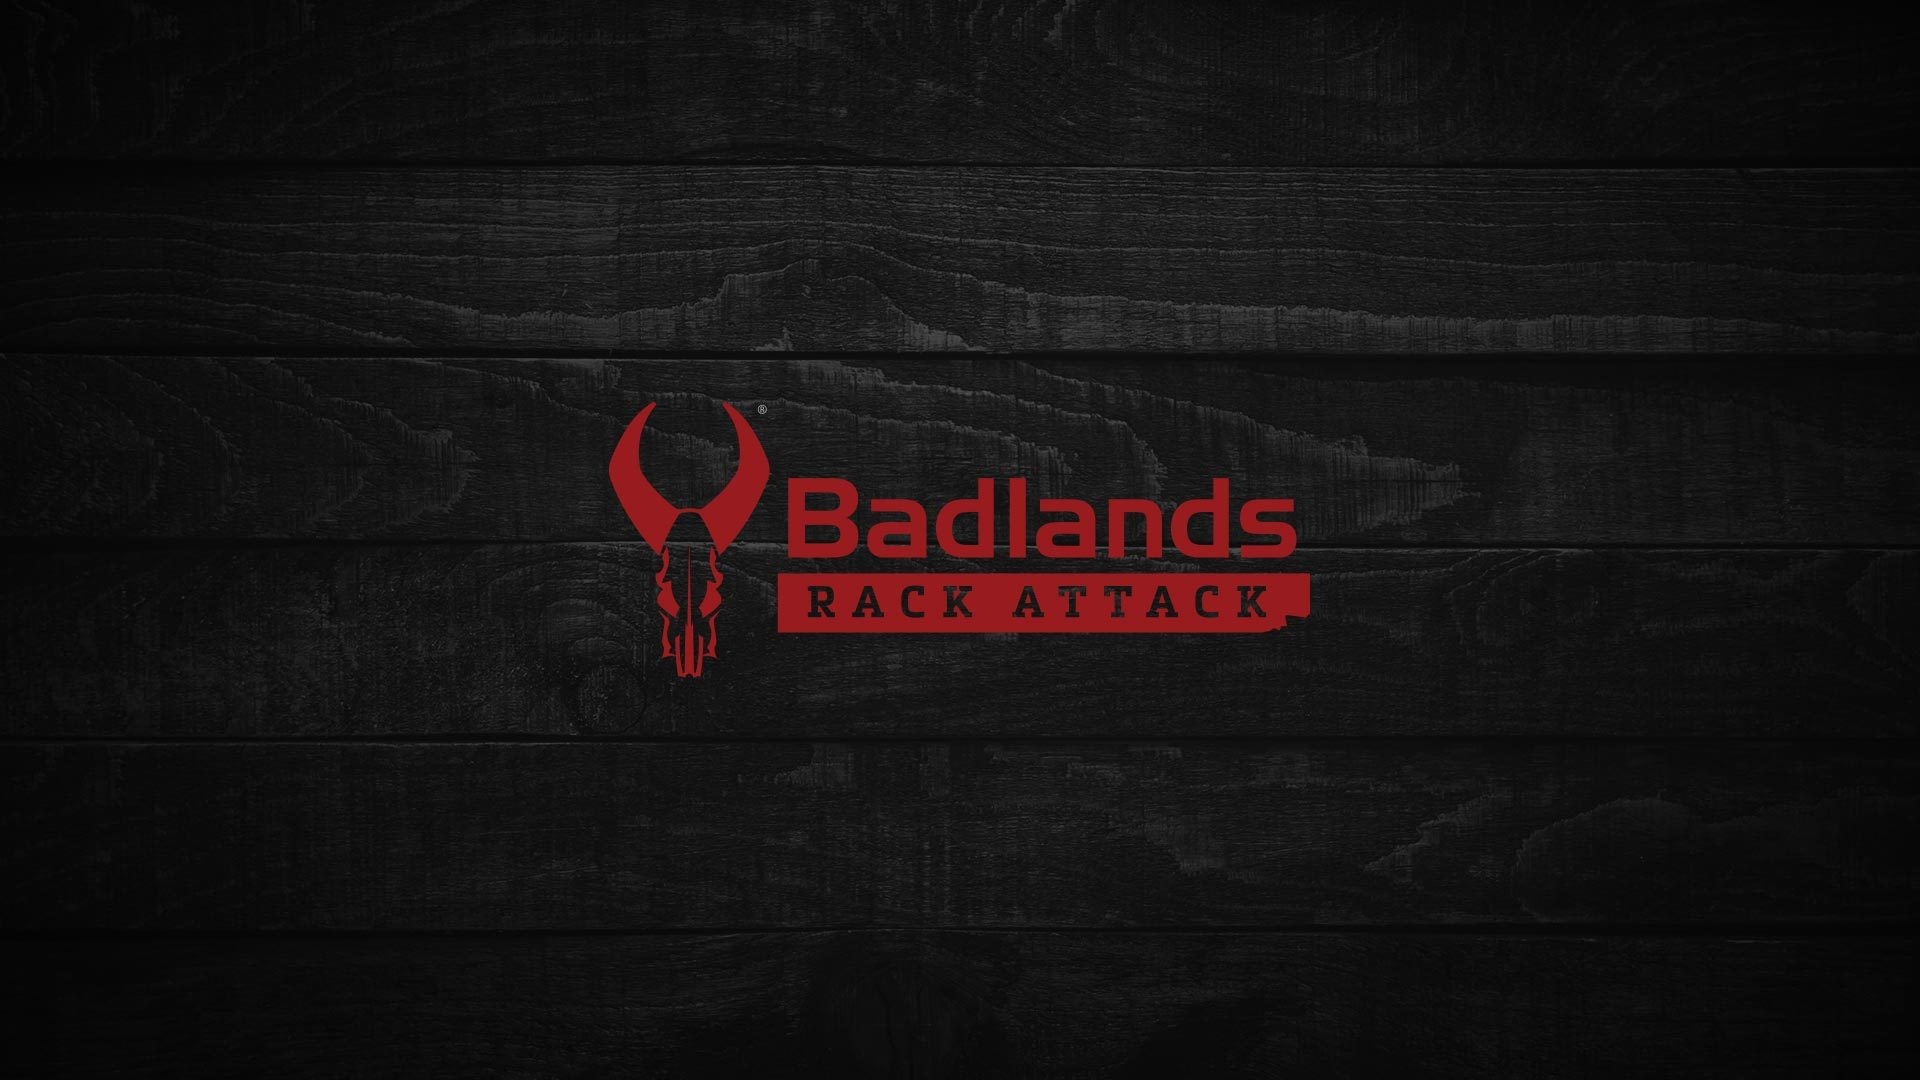 Badlands Rack Attack Season 1 Episode 1: Binocular Harnesses, B.O.B. and Some Group Therapy